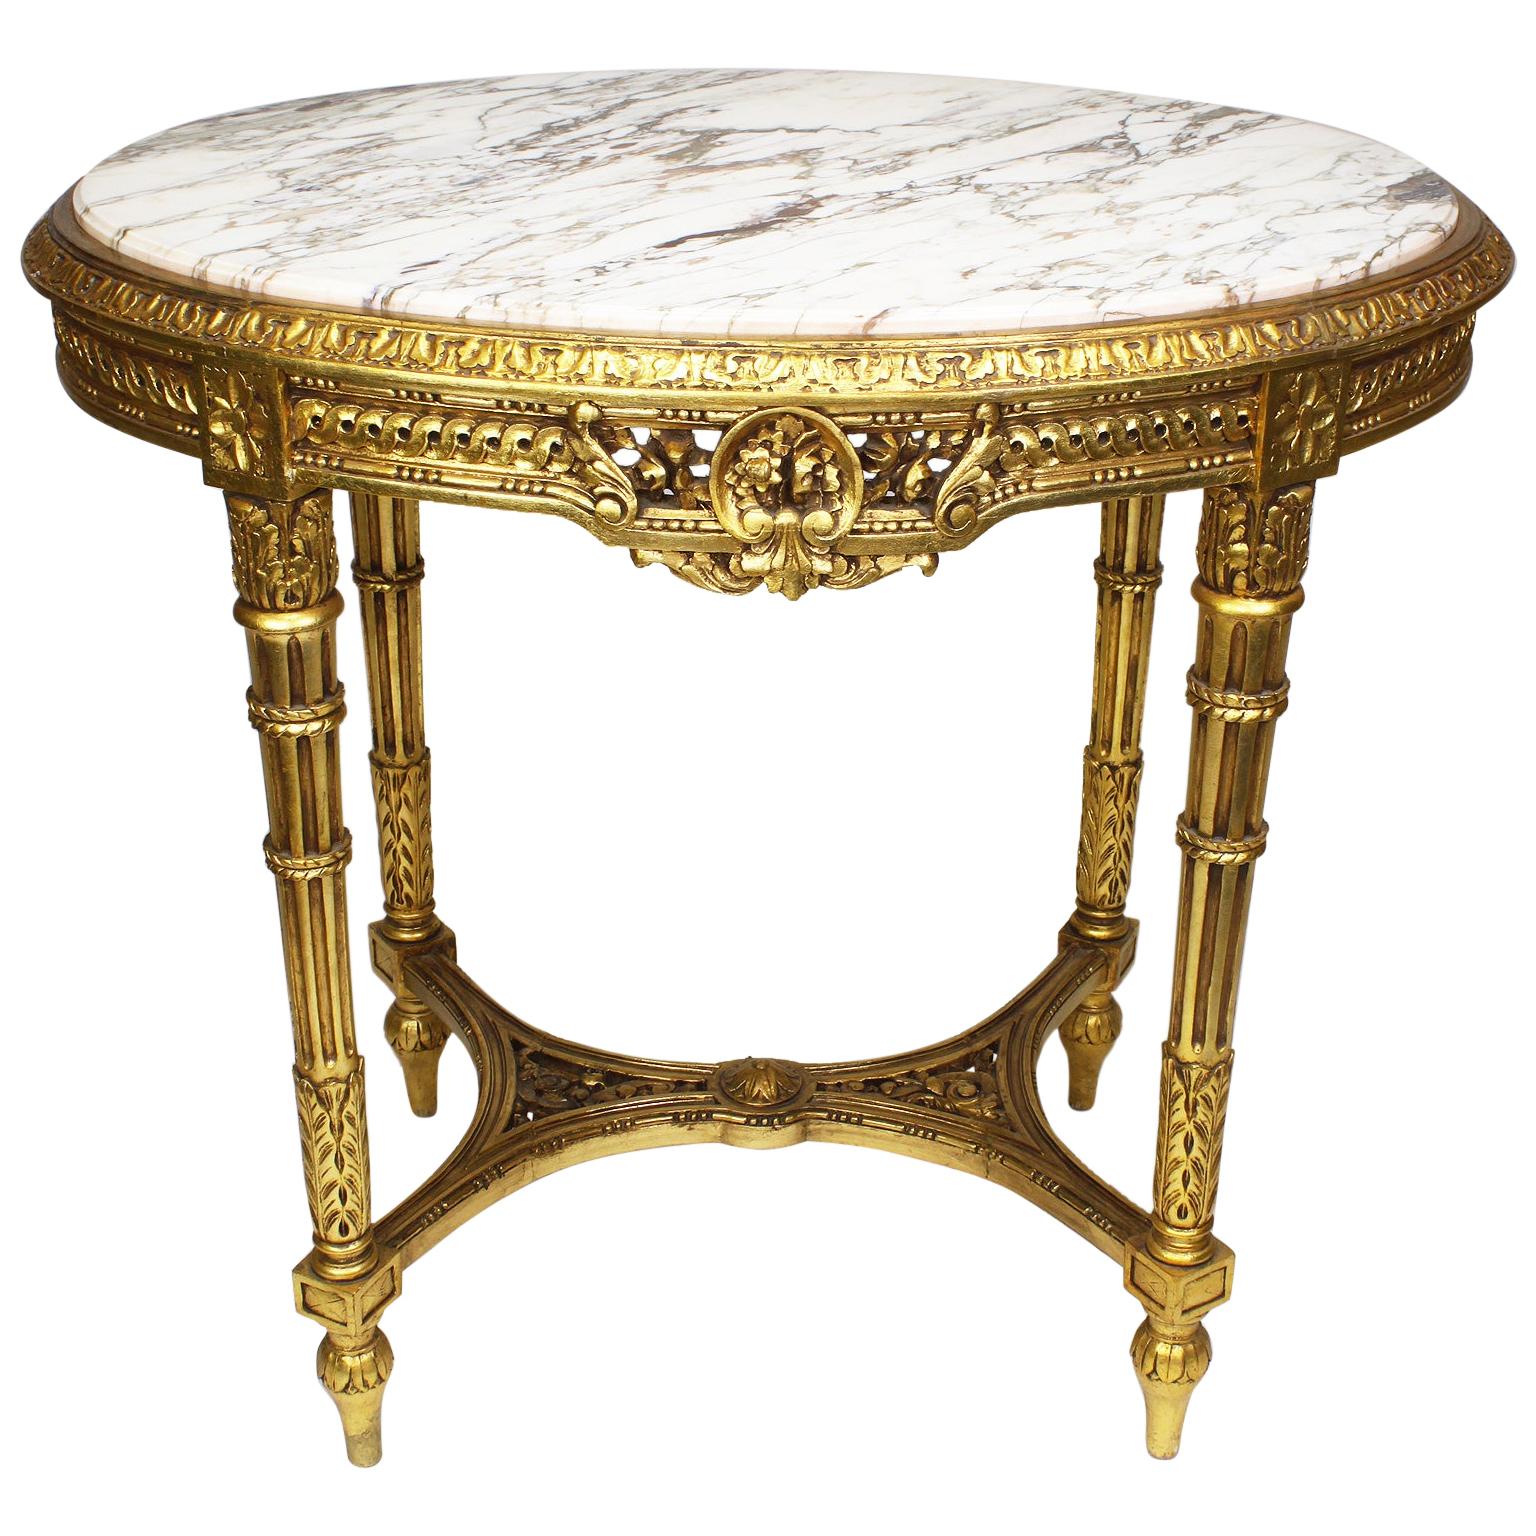 French Louis XVI Style Belle Époque Oval Giltwood Carved Marble-Top Center Table